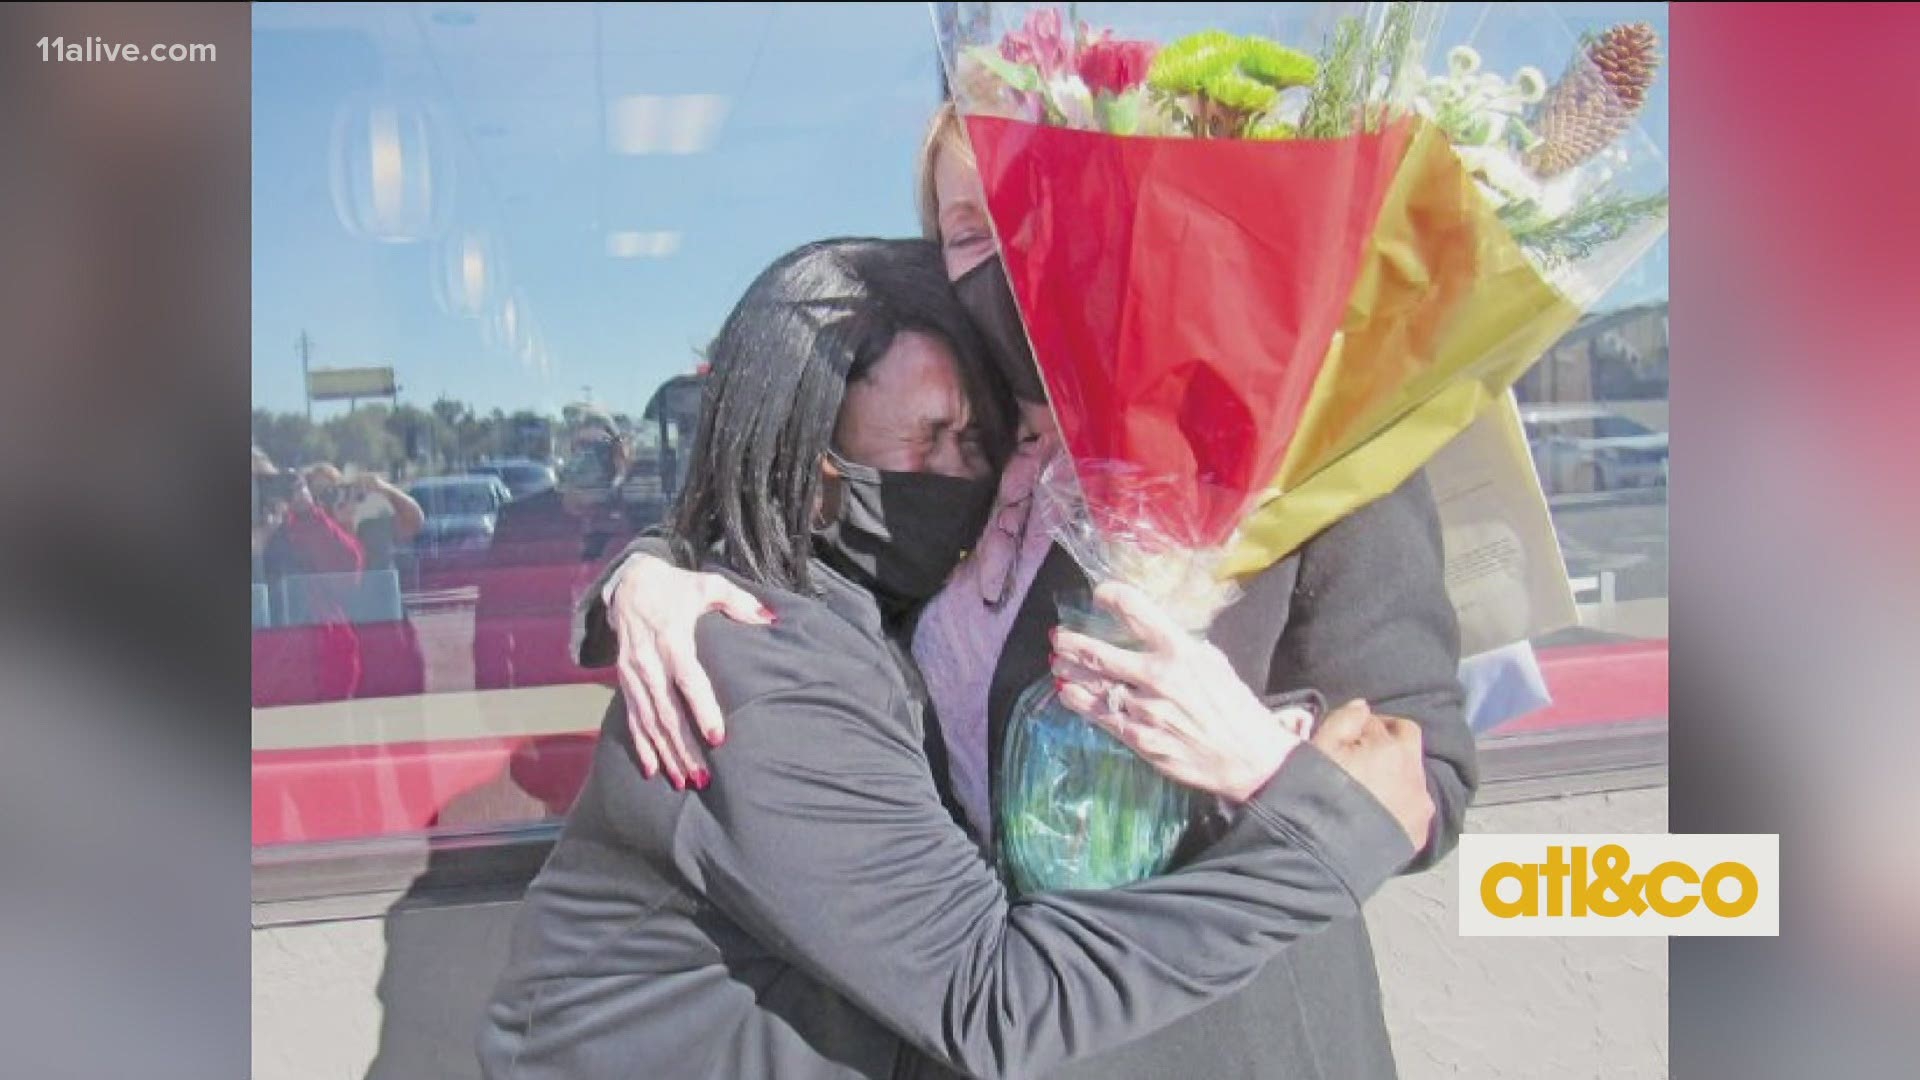 She's a living legend! Sonya Baldwin has worked the Hardee's drive-thru window for 23 years and received a big tip from her beloved community for her sunny service.